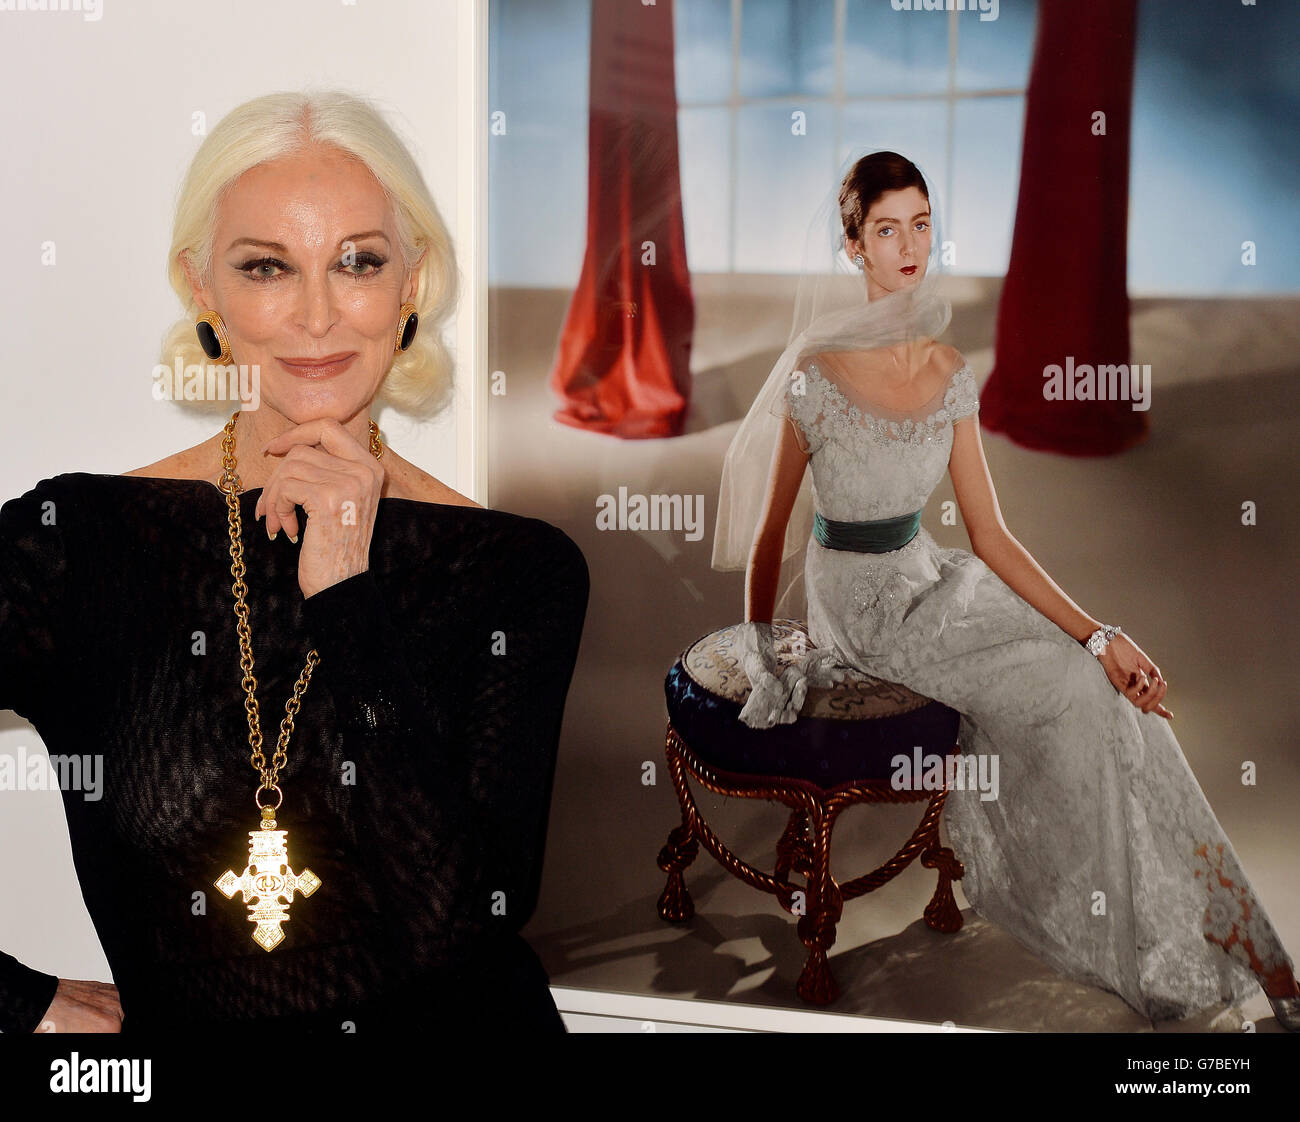 83 year old Carmen Dell' Orefice, who is often cited as the world's oldest model, next to portrait of her taken by Horst P Horst in 1947 when she was fifteen, at a photocall to launch an exhibition by the celebrated Vogue magazine fashion photographer at the Victorian & Albert Museum in central London. Stock Photo